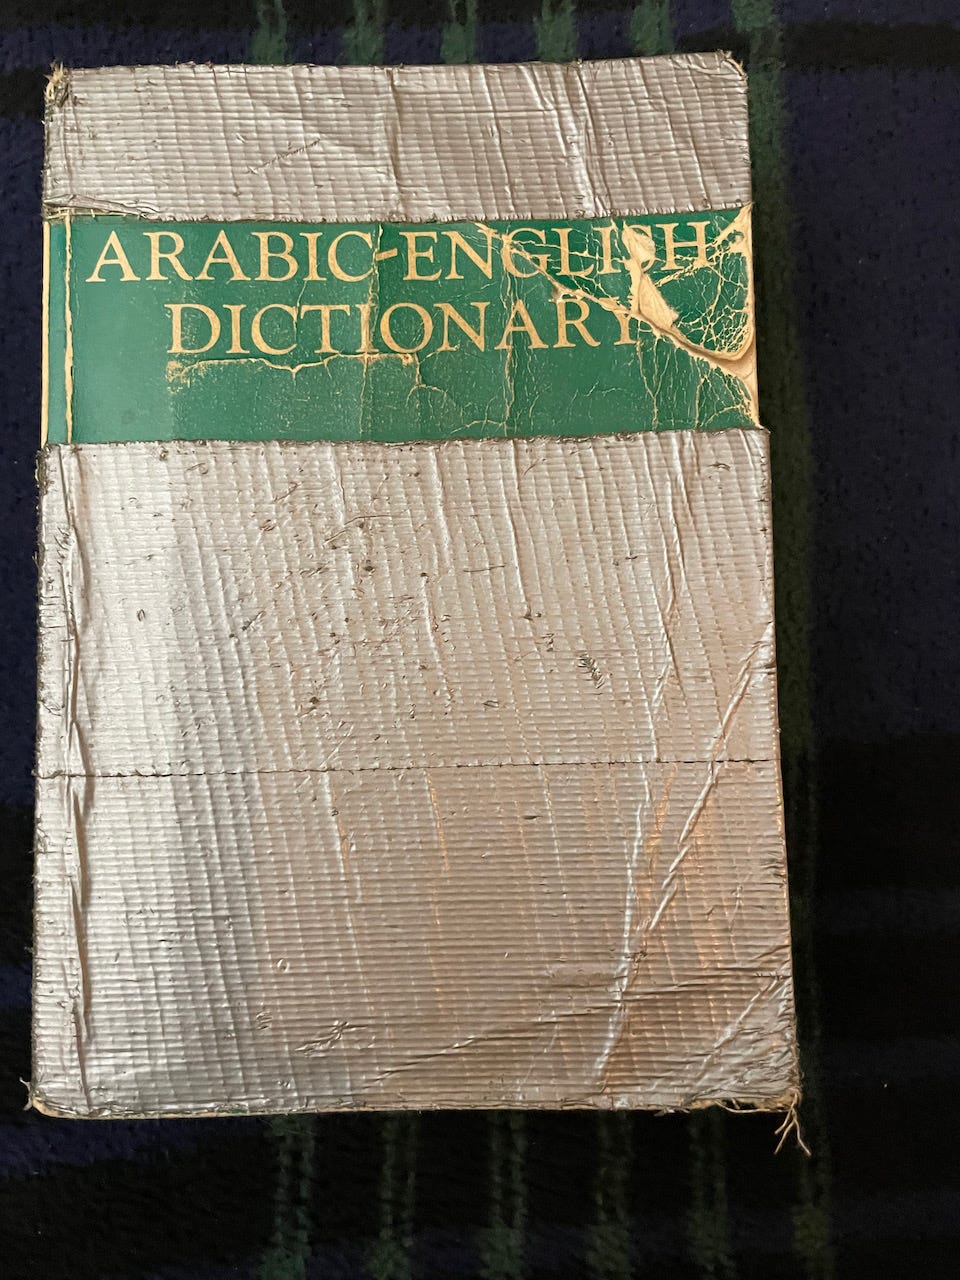 Photo of the well-used cover of Hans Wehr's Arabic-English